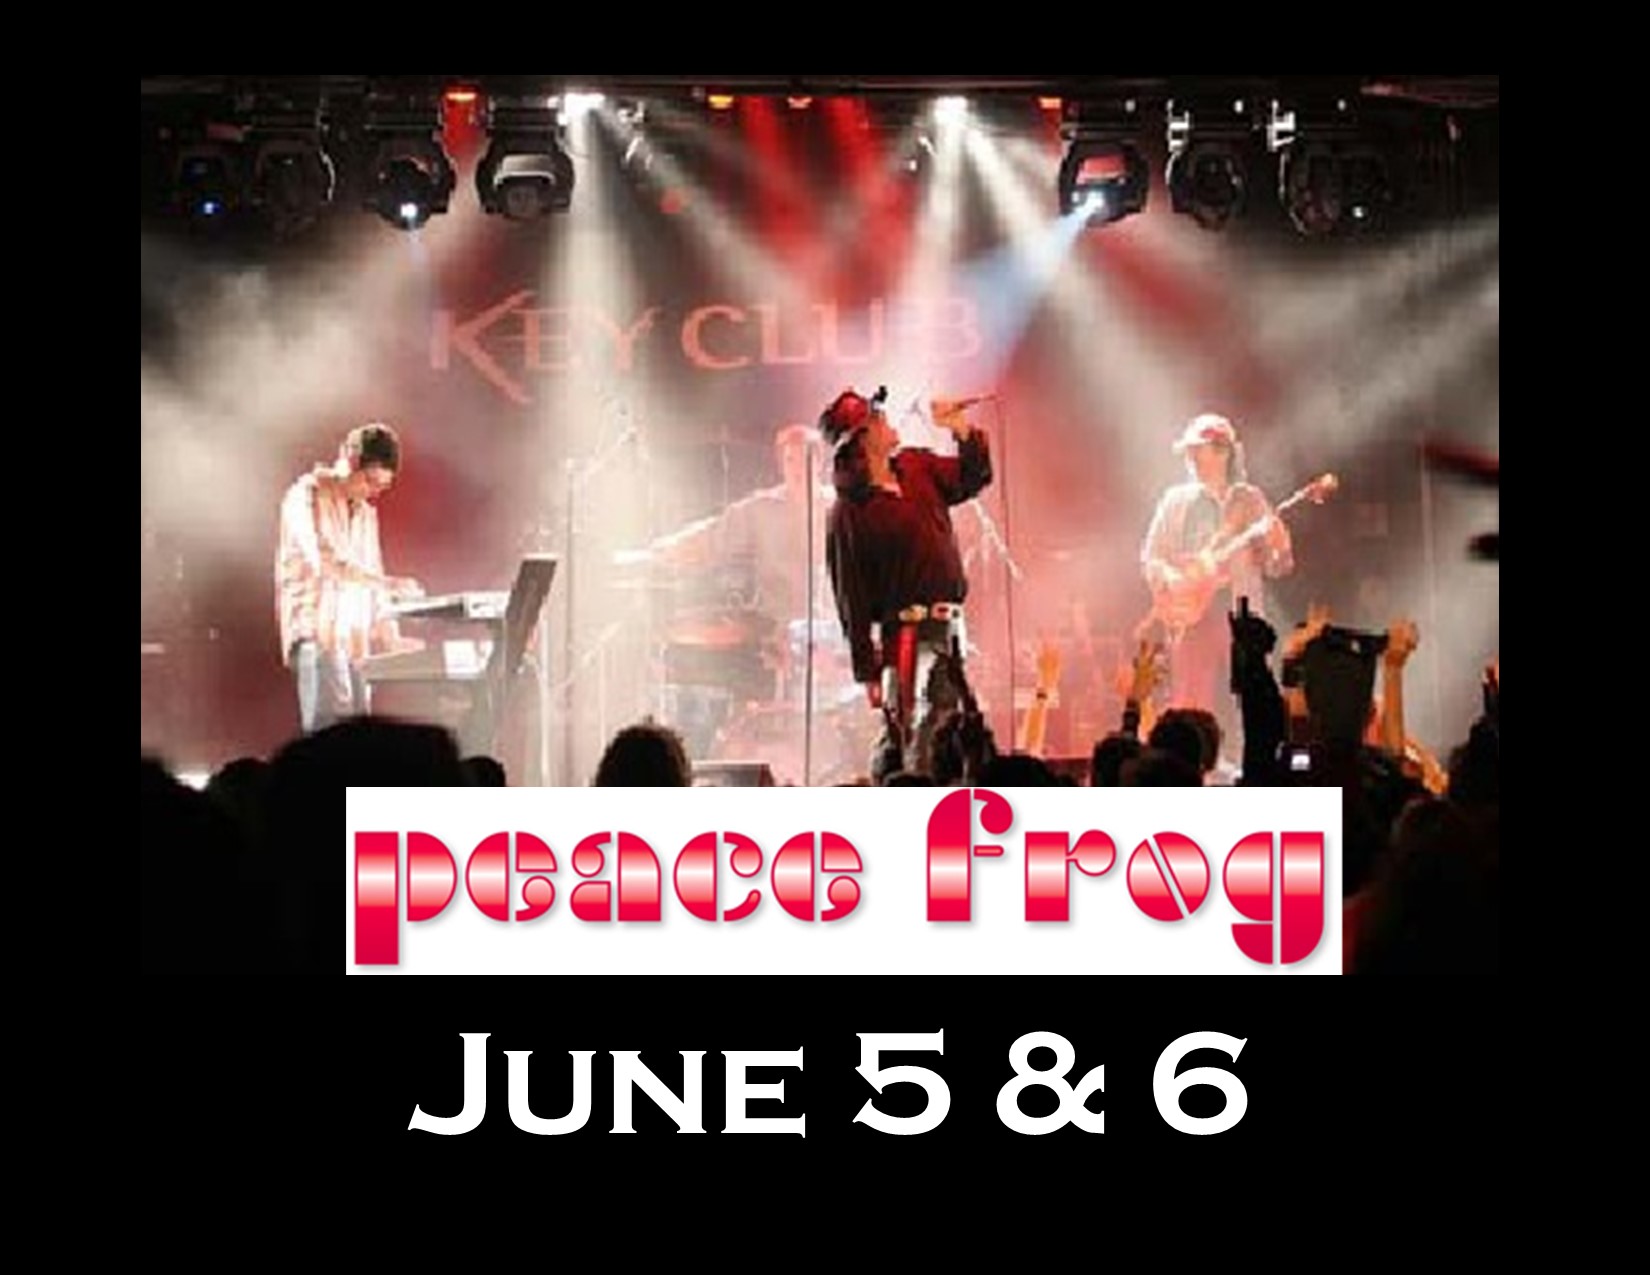 peace frog band tour